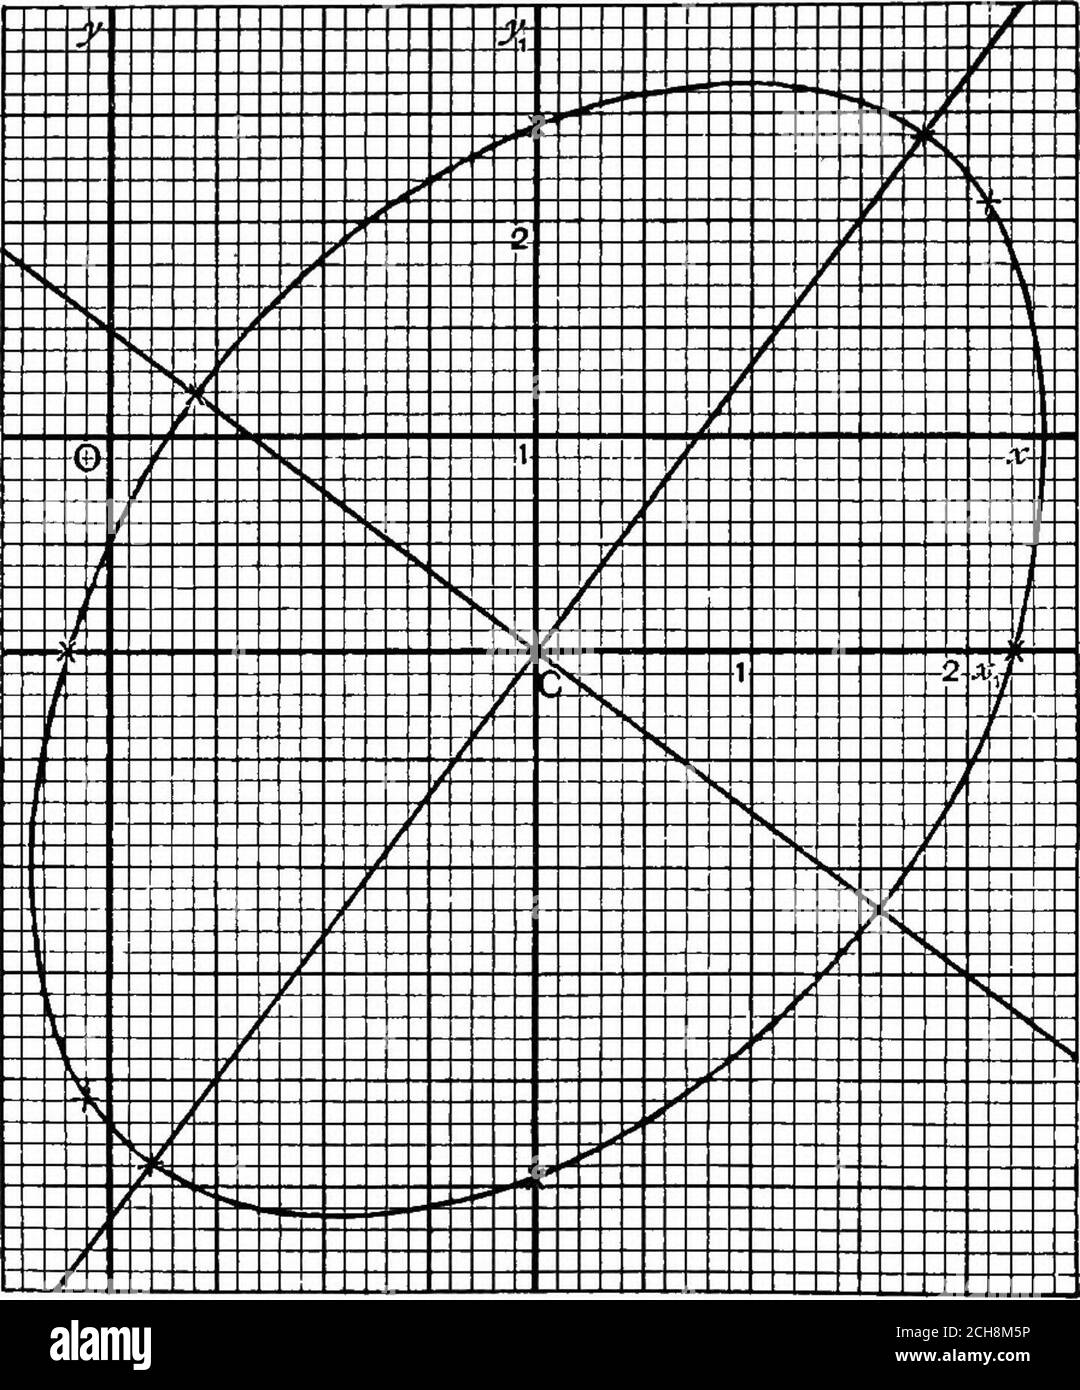 Algebraic Geometry A New Treatise On Analytical Conic Sections Pig 178 They Coincide If Hh 4 Or K Br K J Iac This May Be Written Ah H R H A